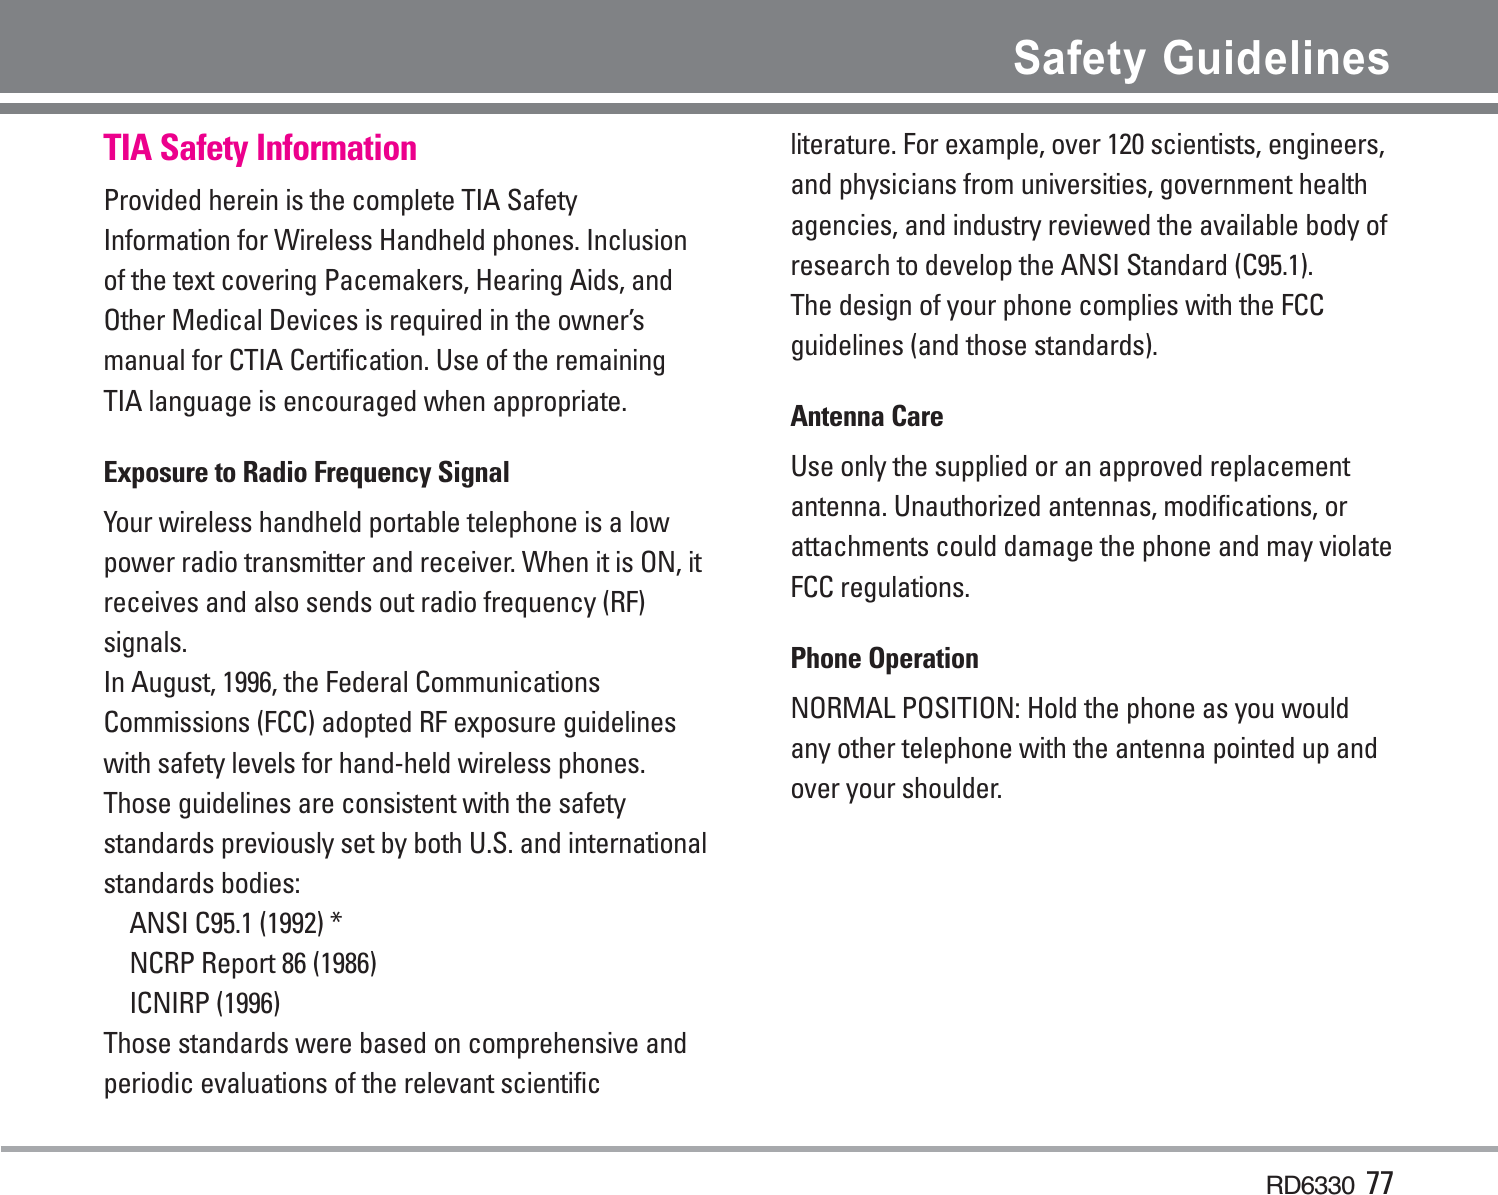 RD6330 77Safety GuidelinesTIA Safety InformationProvided herein is the complete TIA SafetyInformation for Wireless Handheld phones. Inclusionof the text covering Pacemakers, Hearing Aids, andOther Medical Devices is required in the owner’smanual for CTIA Certification. Use of the remainingTIA language is encouraged when appropriate.Exposure to Radio Frequency SignalYour wireless handheld portable telephone is a lowpower radio transmitter and receiver. When it is ON, itreceives and also sends out radio frequency (RF)signals.In August, 1996, the Federal CommunicationsCommissions (FCC) adopted RF exposure guidelineswith safety levels for hand-held wireless phones.Those guidelines are consistent with the safetystandards previously set by both U.S. and internationalstandards bodies:ANSI C95.1 (1992) *NCRP Report 86 (1986)ICNIRP (1996)Those standards were based on comprehensive andperiodic evaluations of the relevant scientificliterature. For example, over 120 scientists, engineers,and physicians from universities, government healthagencies, and industry reviewed the available body ofresearch to develop the ANSI Standard (C95.1).The design of your phone complies with the FCCguidelines (and those standards).Antenna CareUse only the supplied or an approved replacementantenna. Unauthorized antennas, modifications, orattachments could damage the phone and may violateFCC regulations.Phone OperationNORMAL POSITION: Hold the phone as you wouldany other telephone with the antenna pointed up andover your shoulder.